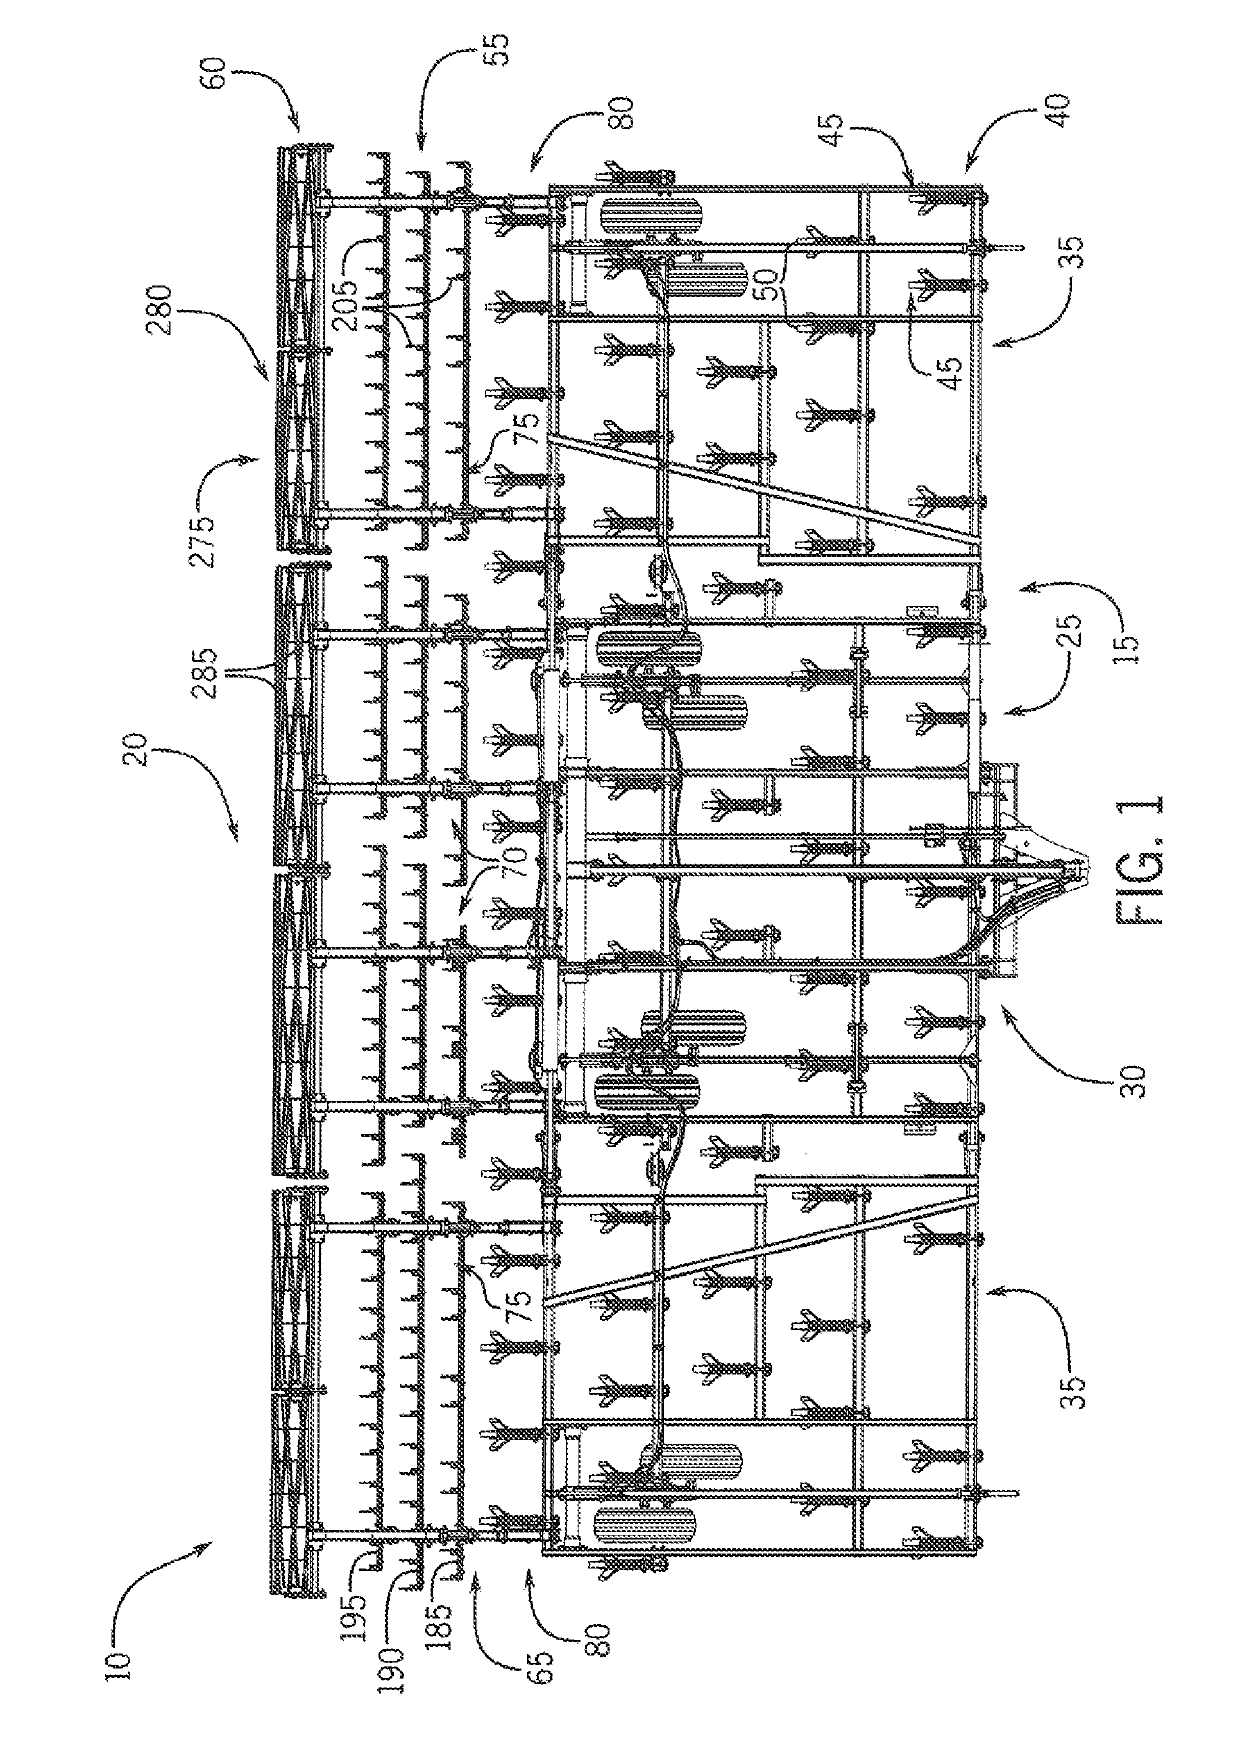 System for equalizing pressure on smoothing tools of a harrow